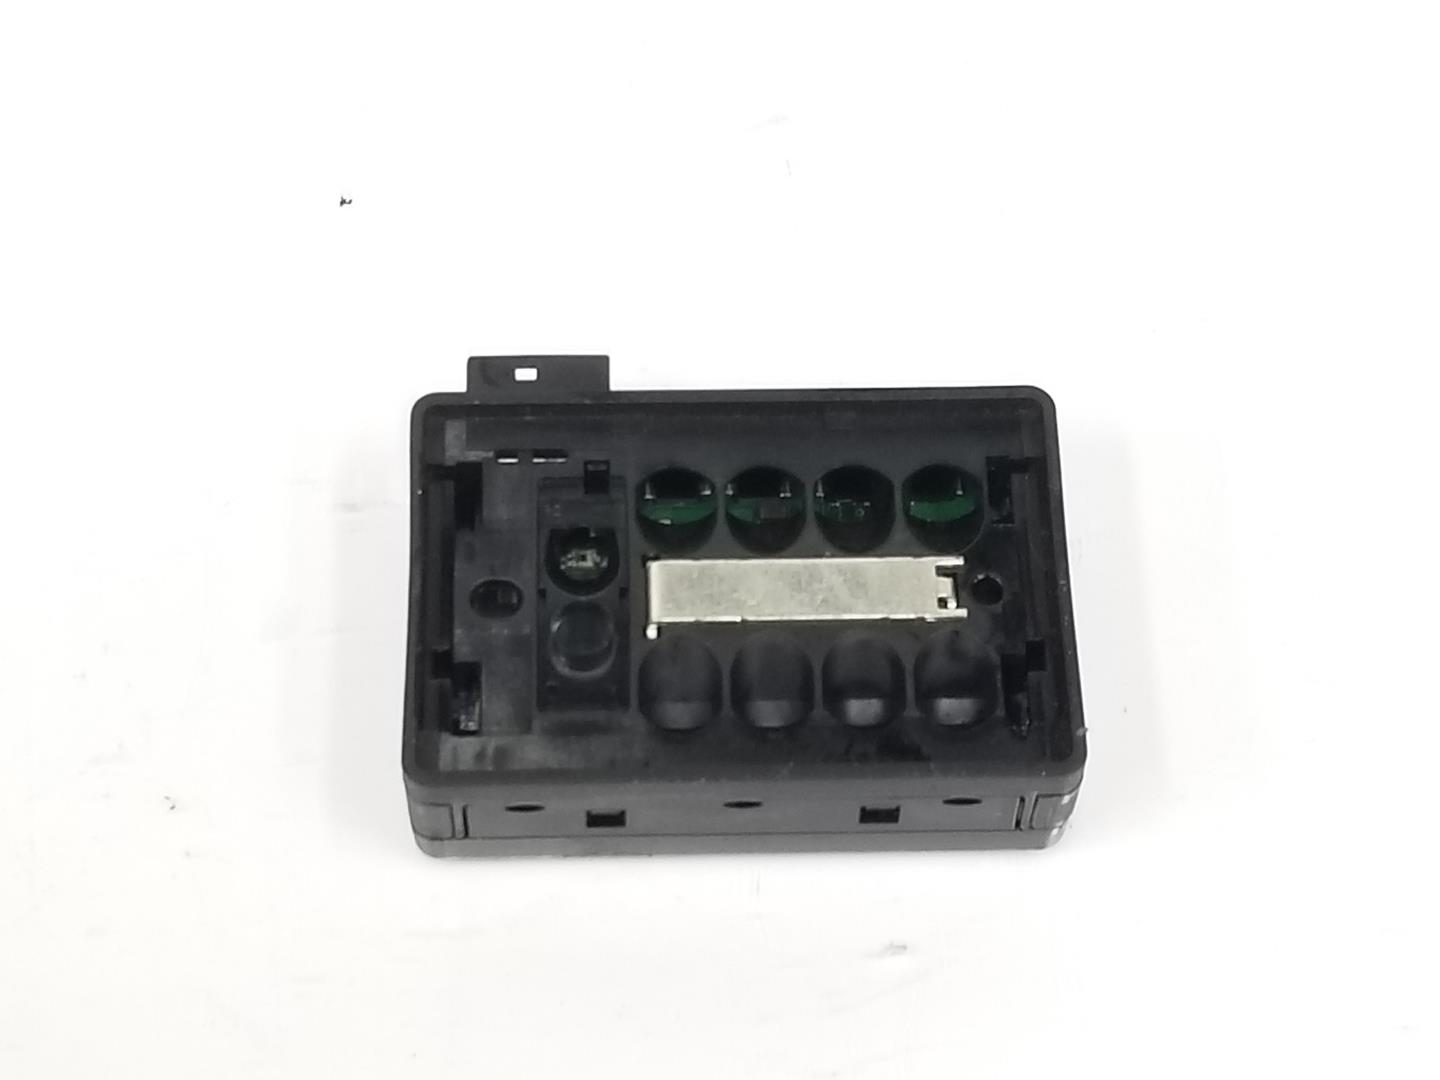 BMW X3 E83 (2003-2010) Other Control Units 61356923954, 6923954 19935193